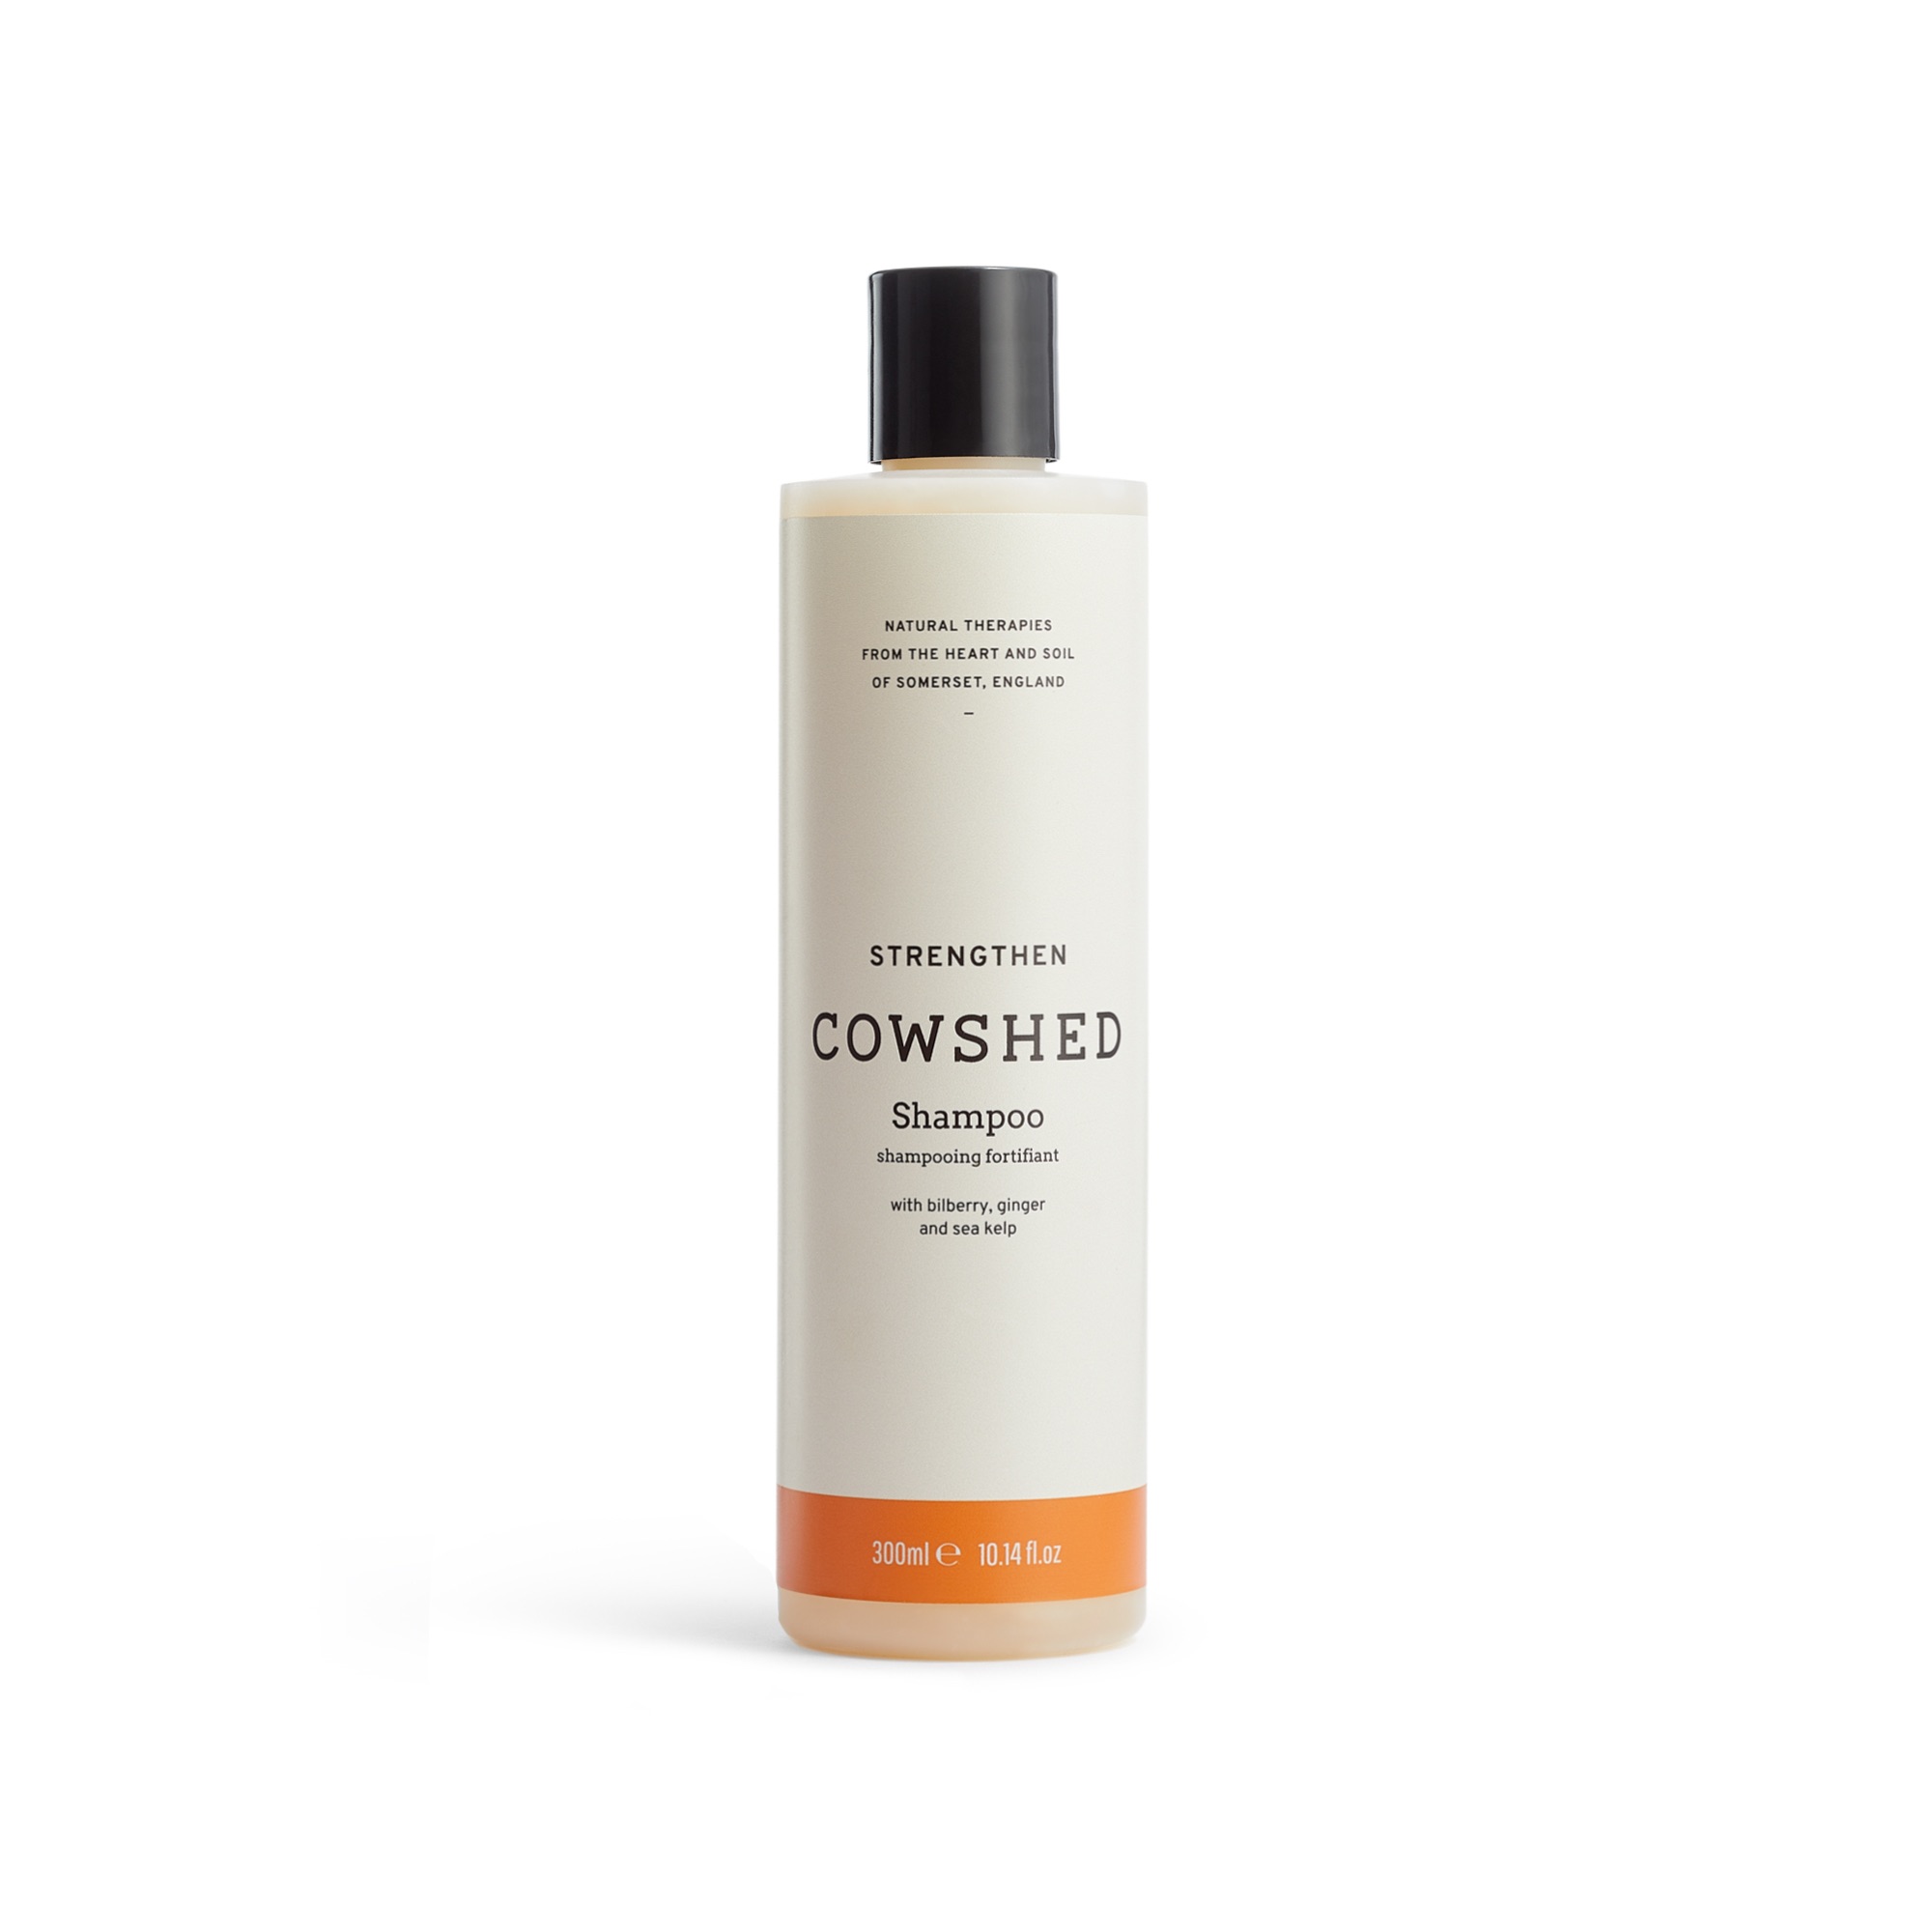 Cowshed STRENGTHEN Shampoo (Wild Cow Strengthening Shampoo) 300ml